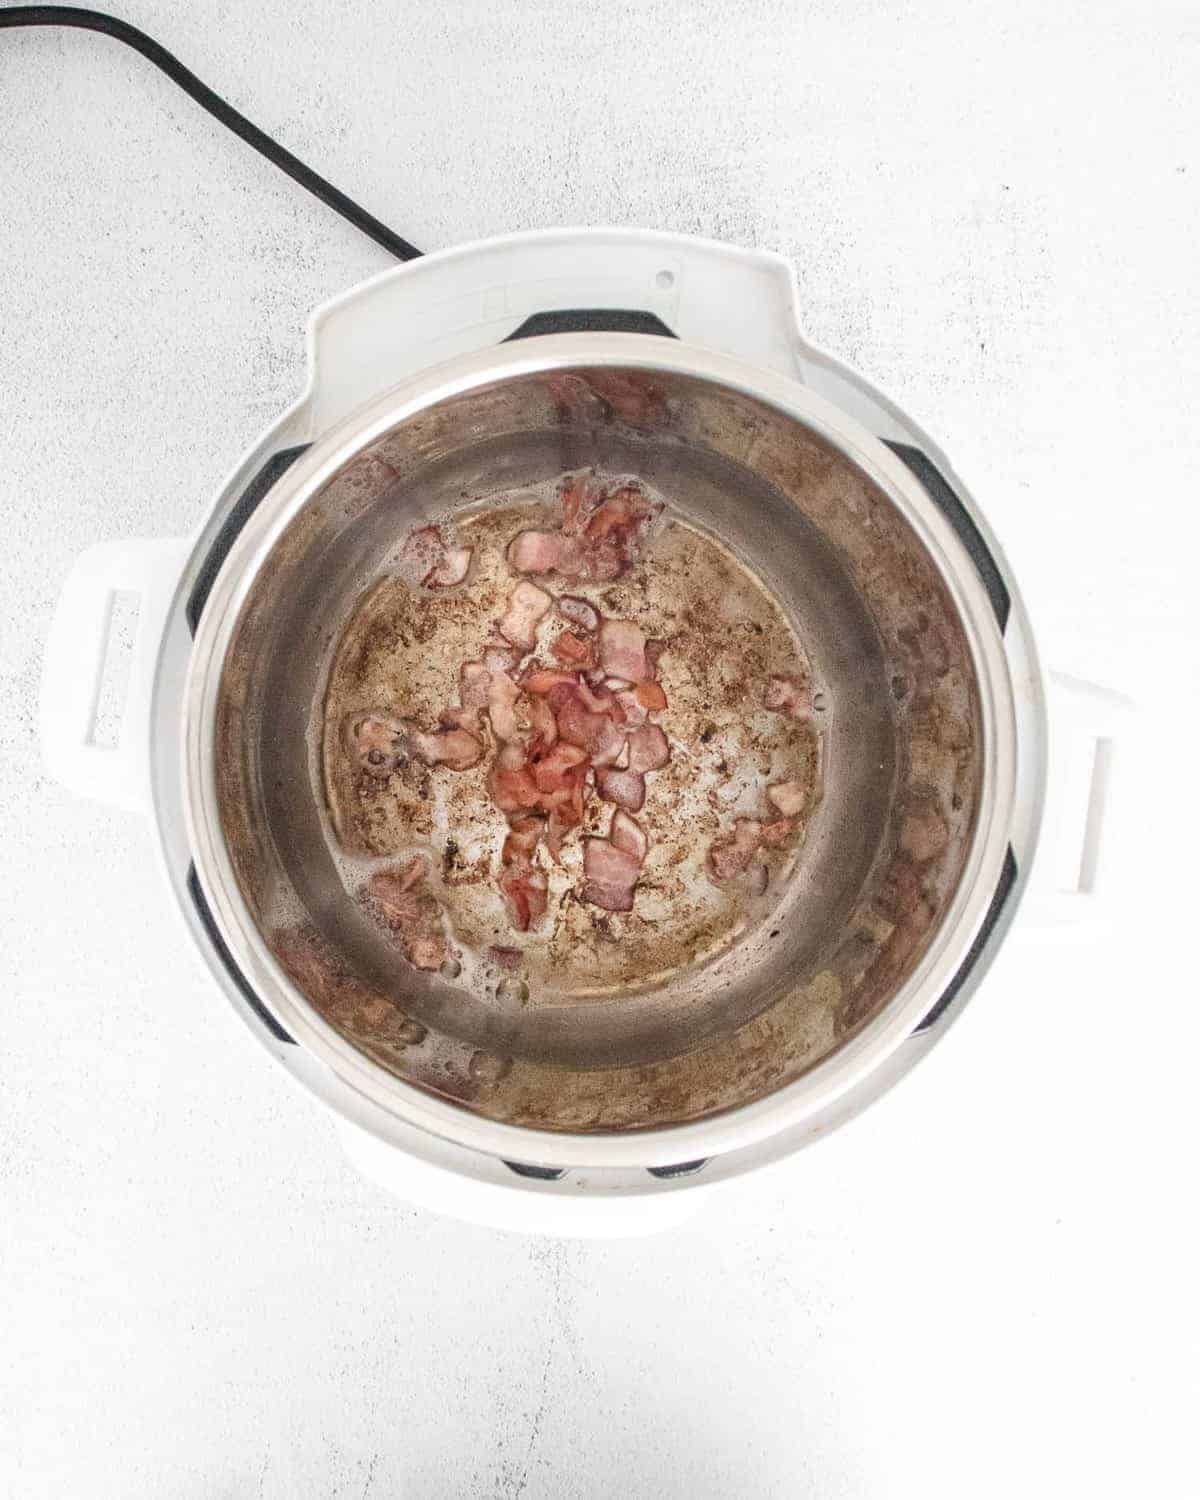 Bacon being sautéed in an instant pot.